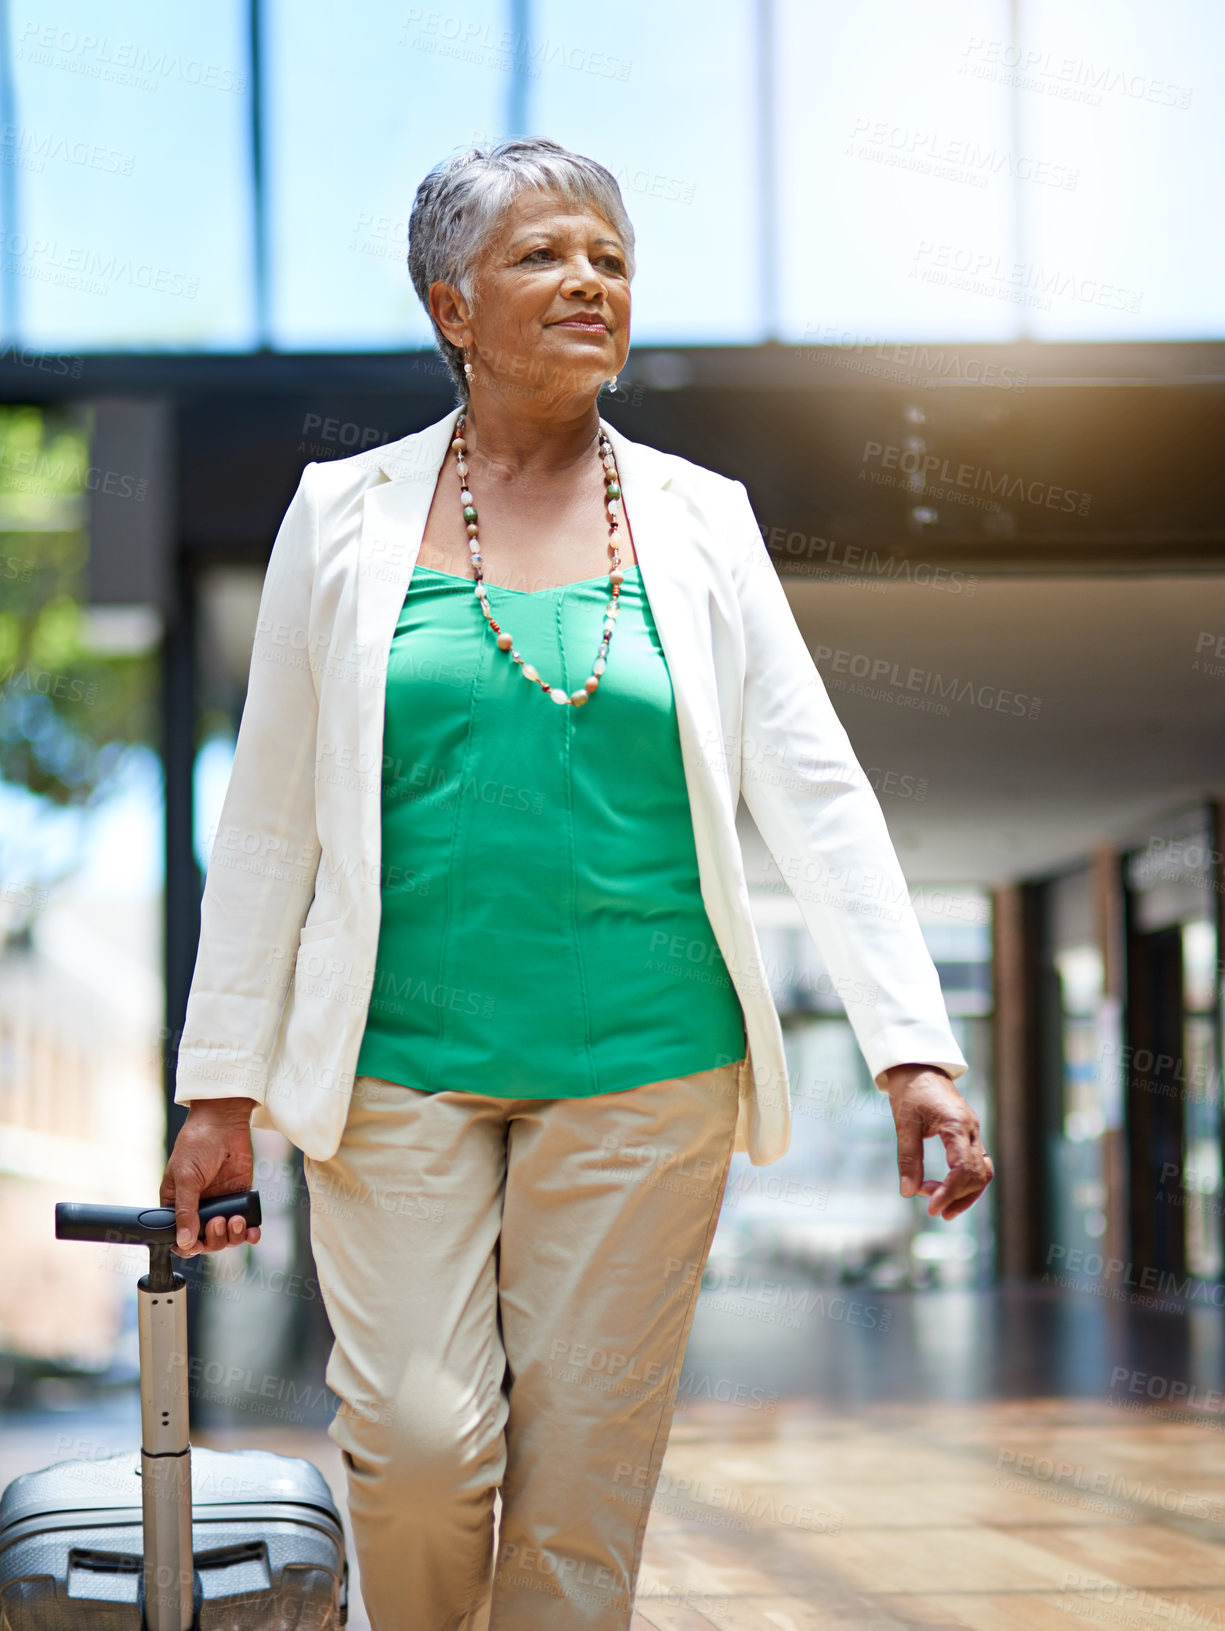 Buy stock photo Shot of a mature woman walking in an airport terminal with her suitcase